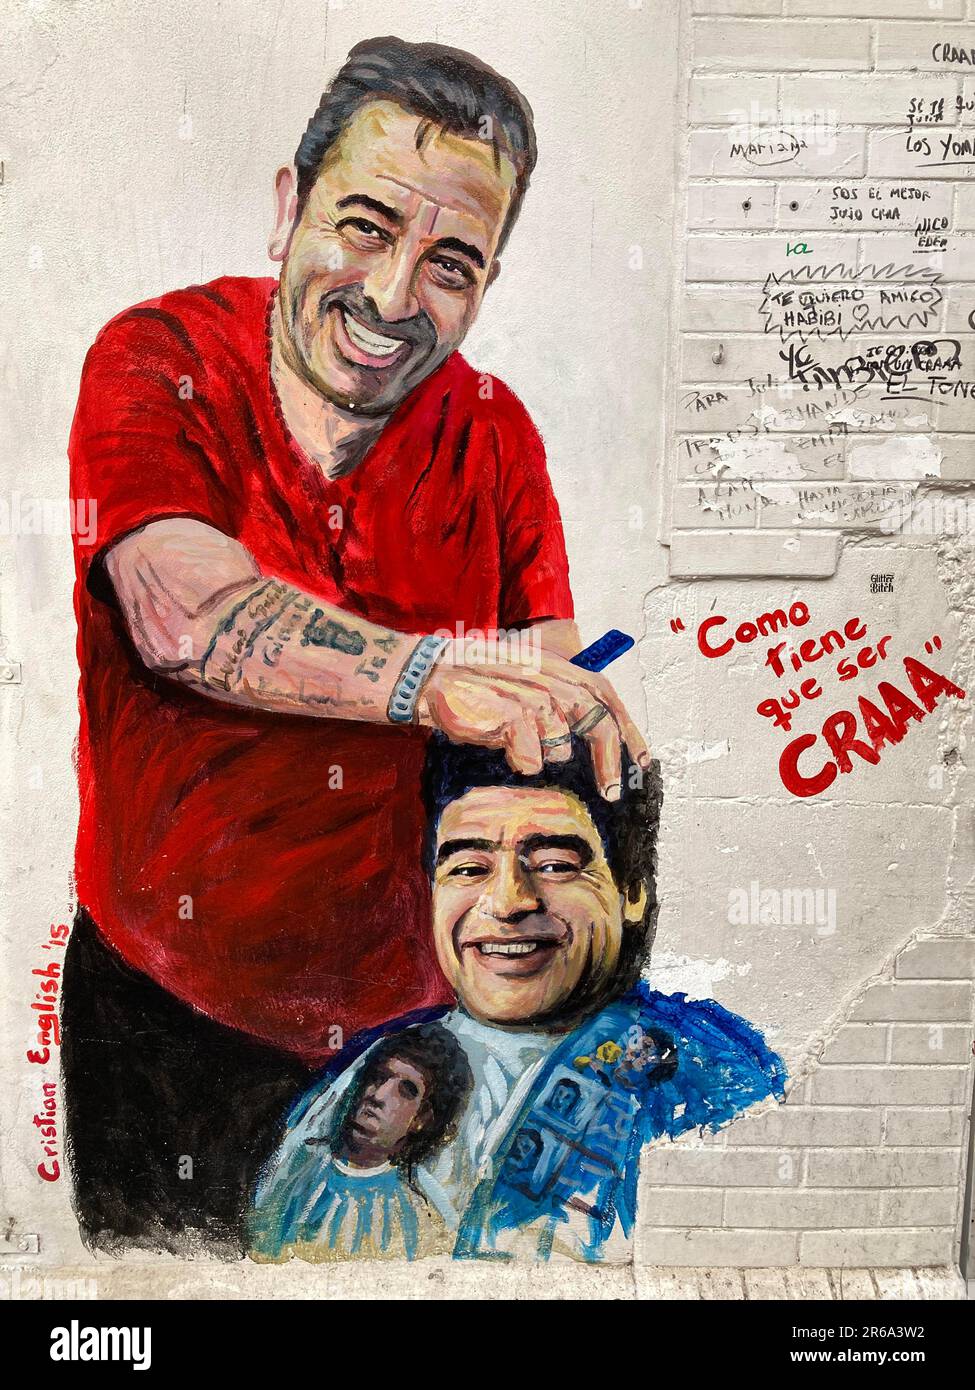 Street art by artist Cristian English shows Diego Maradona getting a haircut, Buenos Aires, Argentina Stock Photo